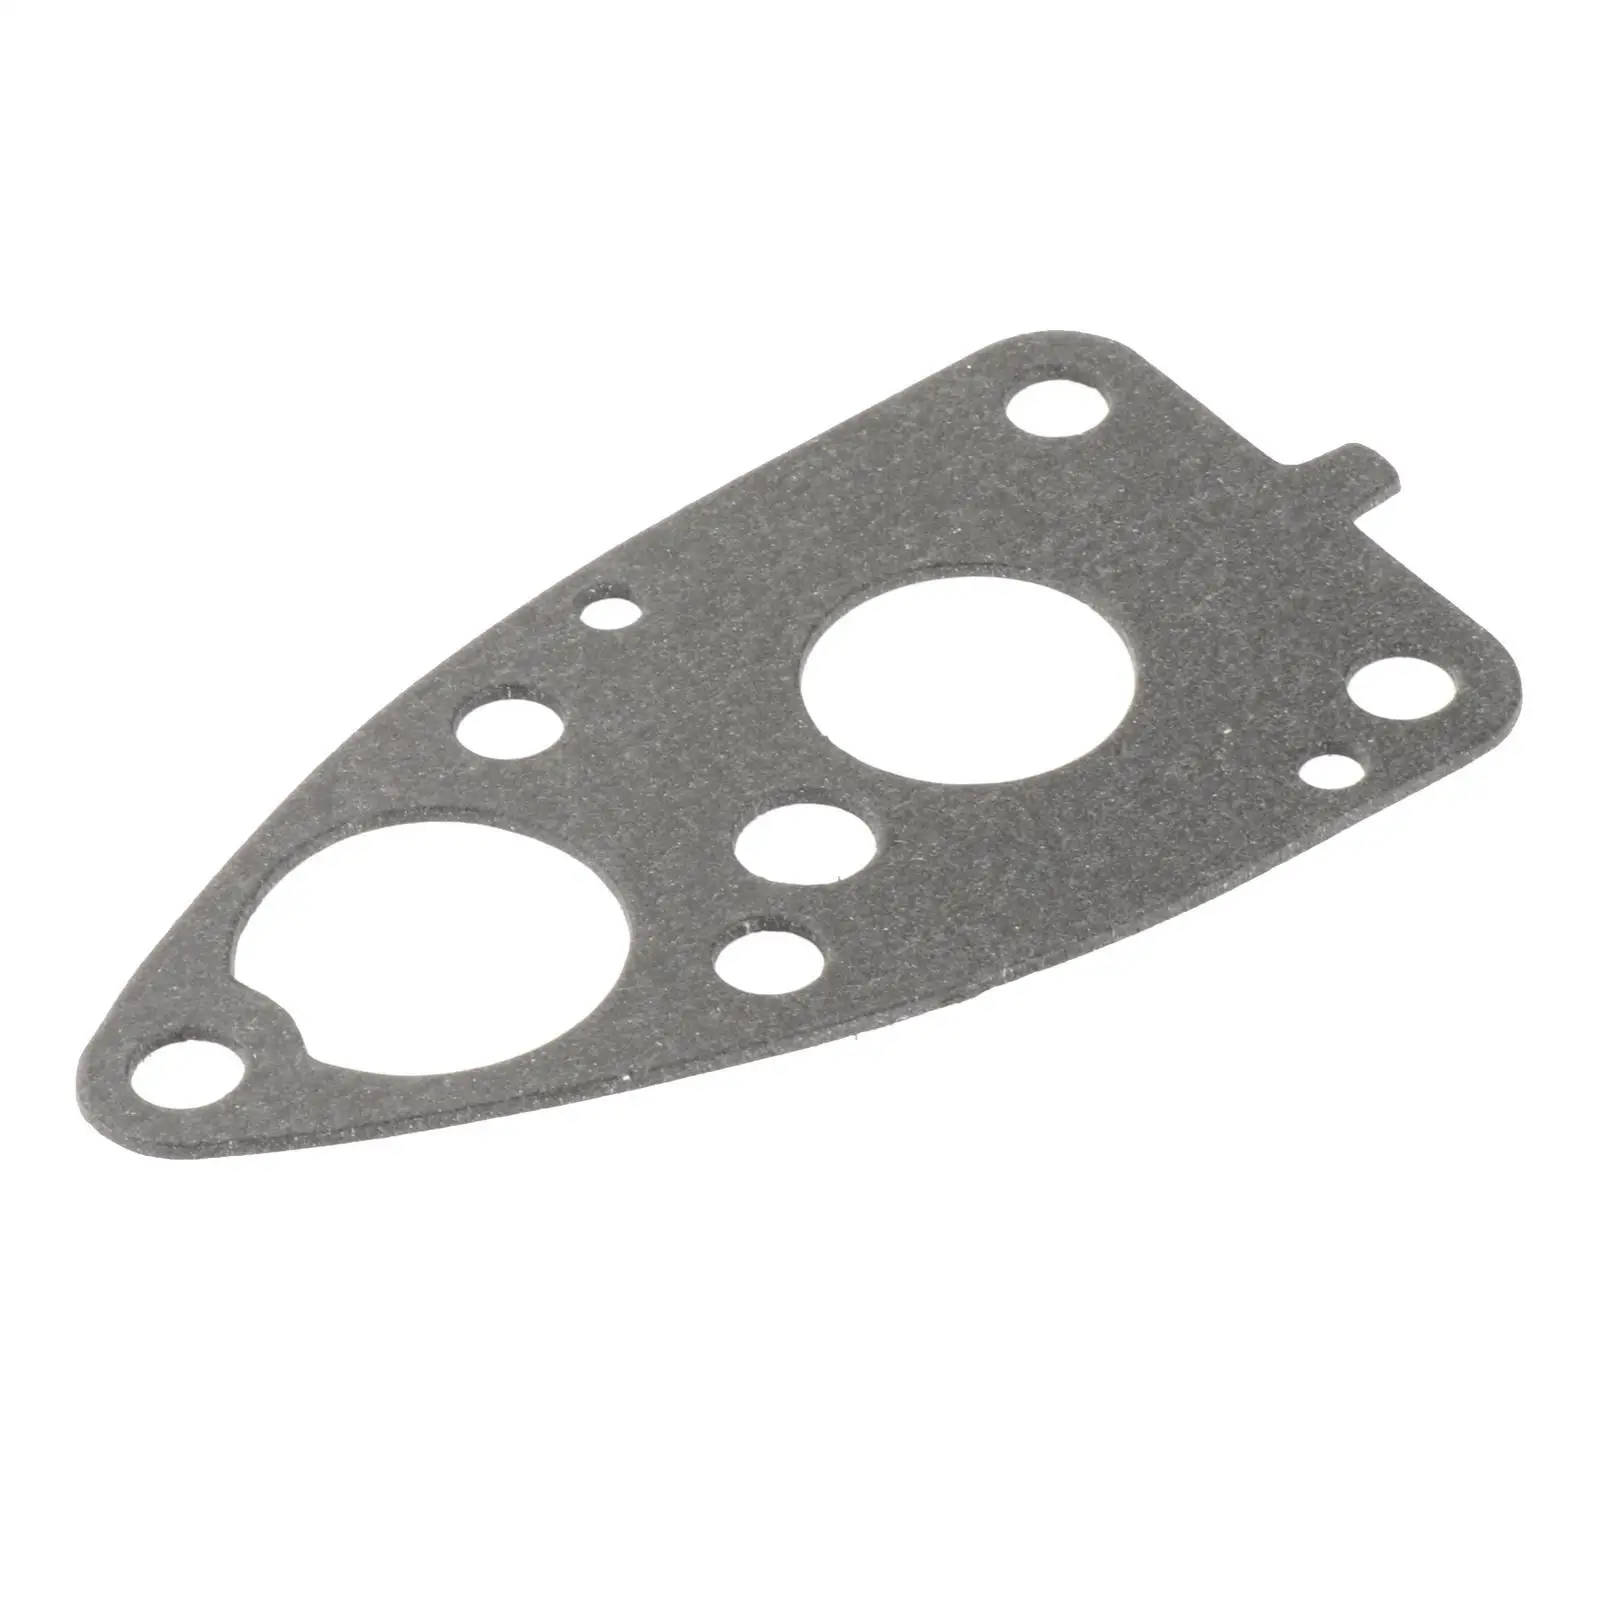 Packing Lower Case, Moulding ,Outboard Lower Gear Case  Gasket Supplies ,Parts 4A 4A 4B 5C 6E0-45315-A0-00, 6E0-45315-A0